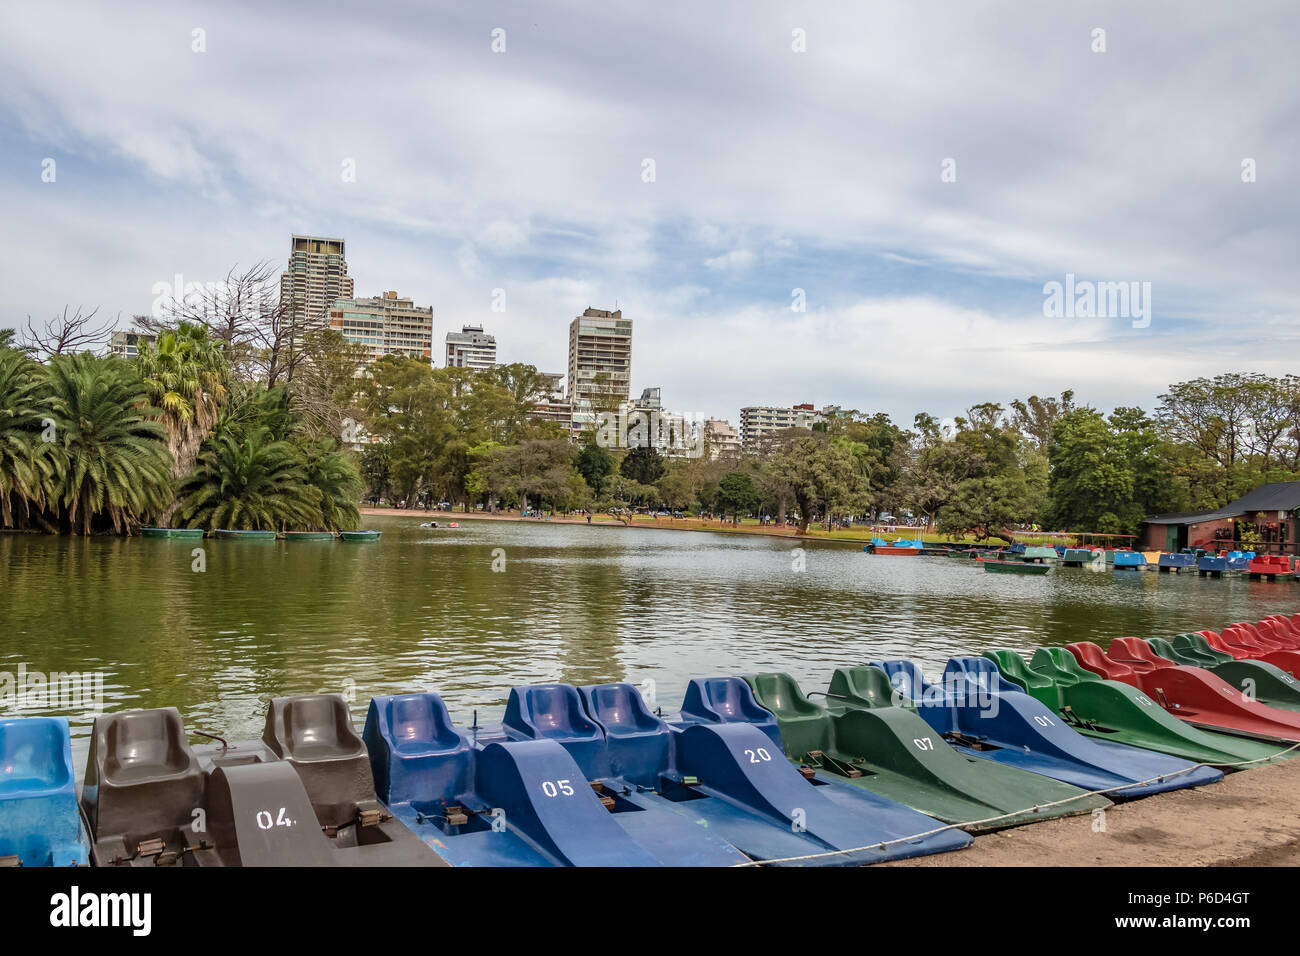 Pedal Boats and lake at Bosques de Palermo (Palermo Woods) - Buenos Aires, Argentina Stock Photo